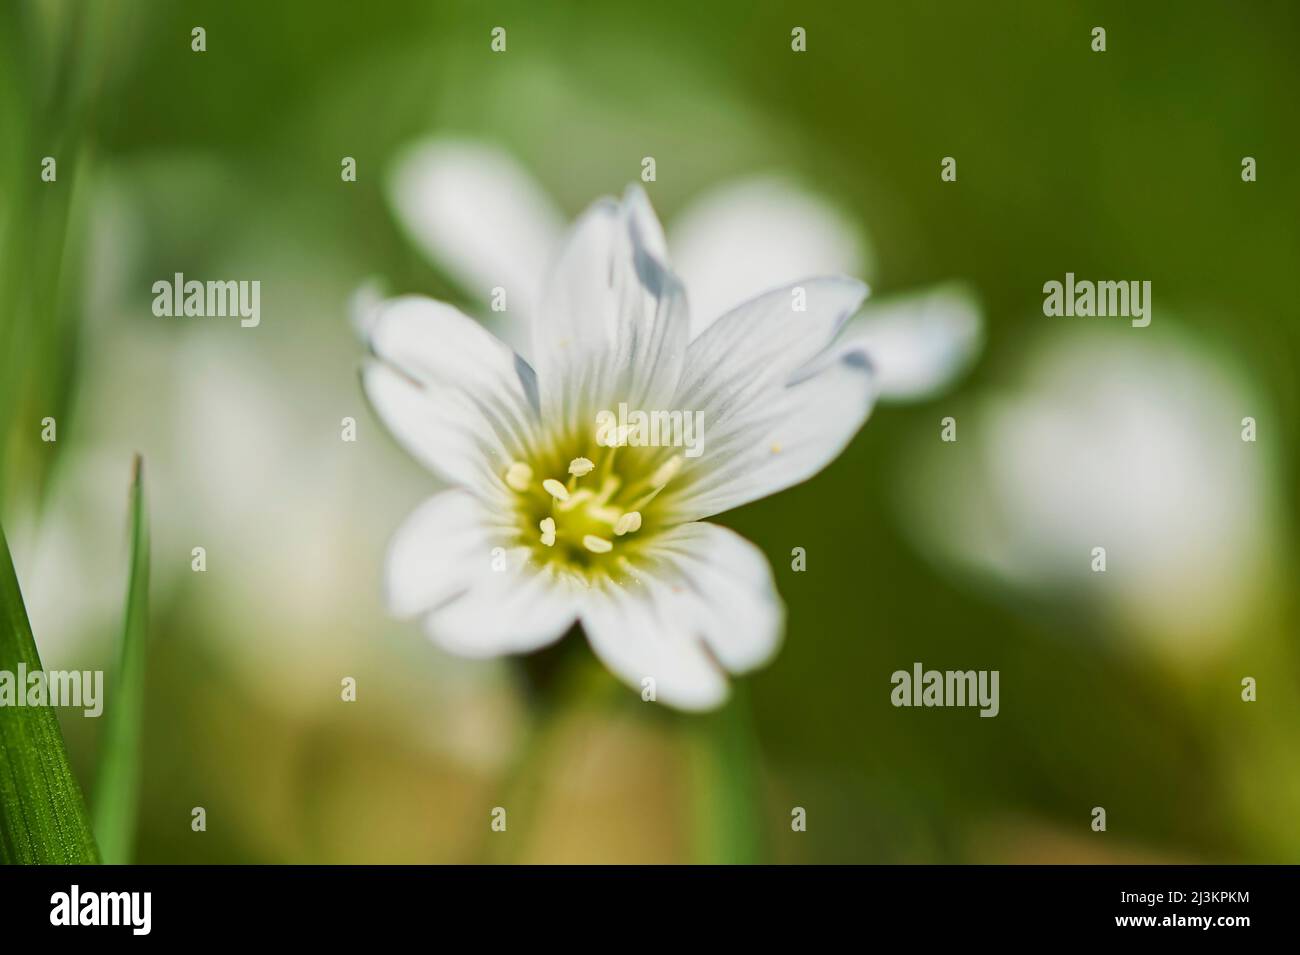 Field mouse-ear or field chickweed (Cerastium arvense) blooming; Bavaria, Germany Stock Photo